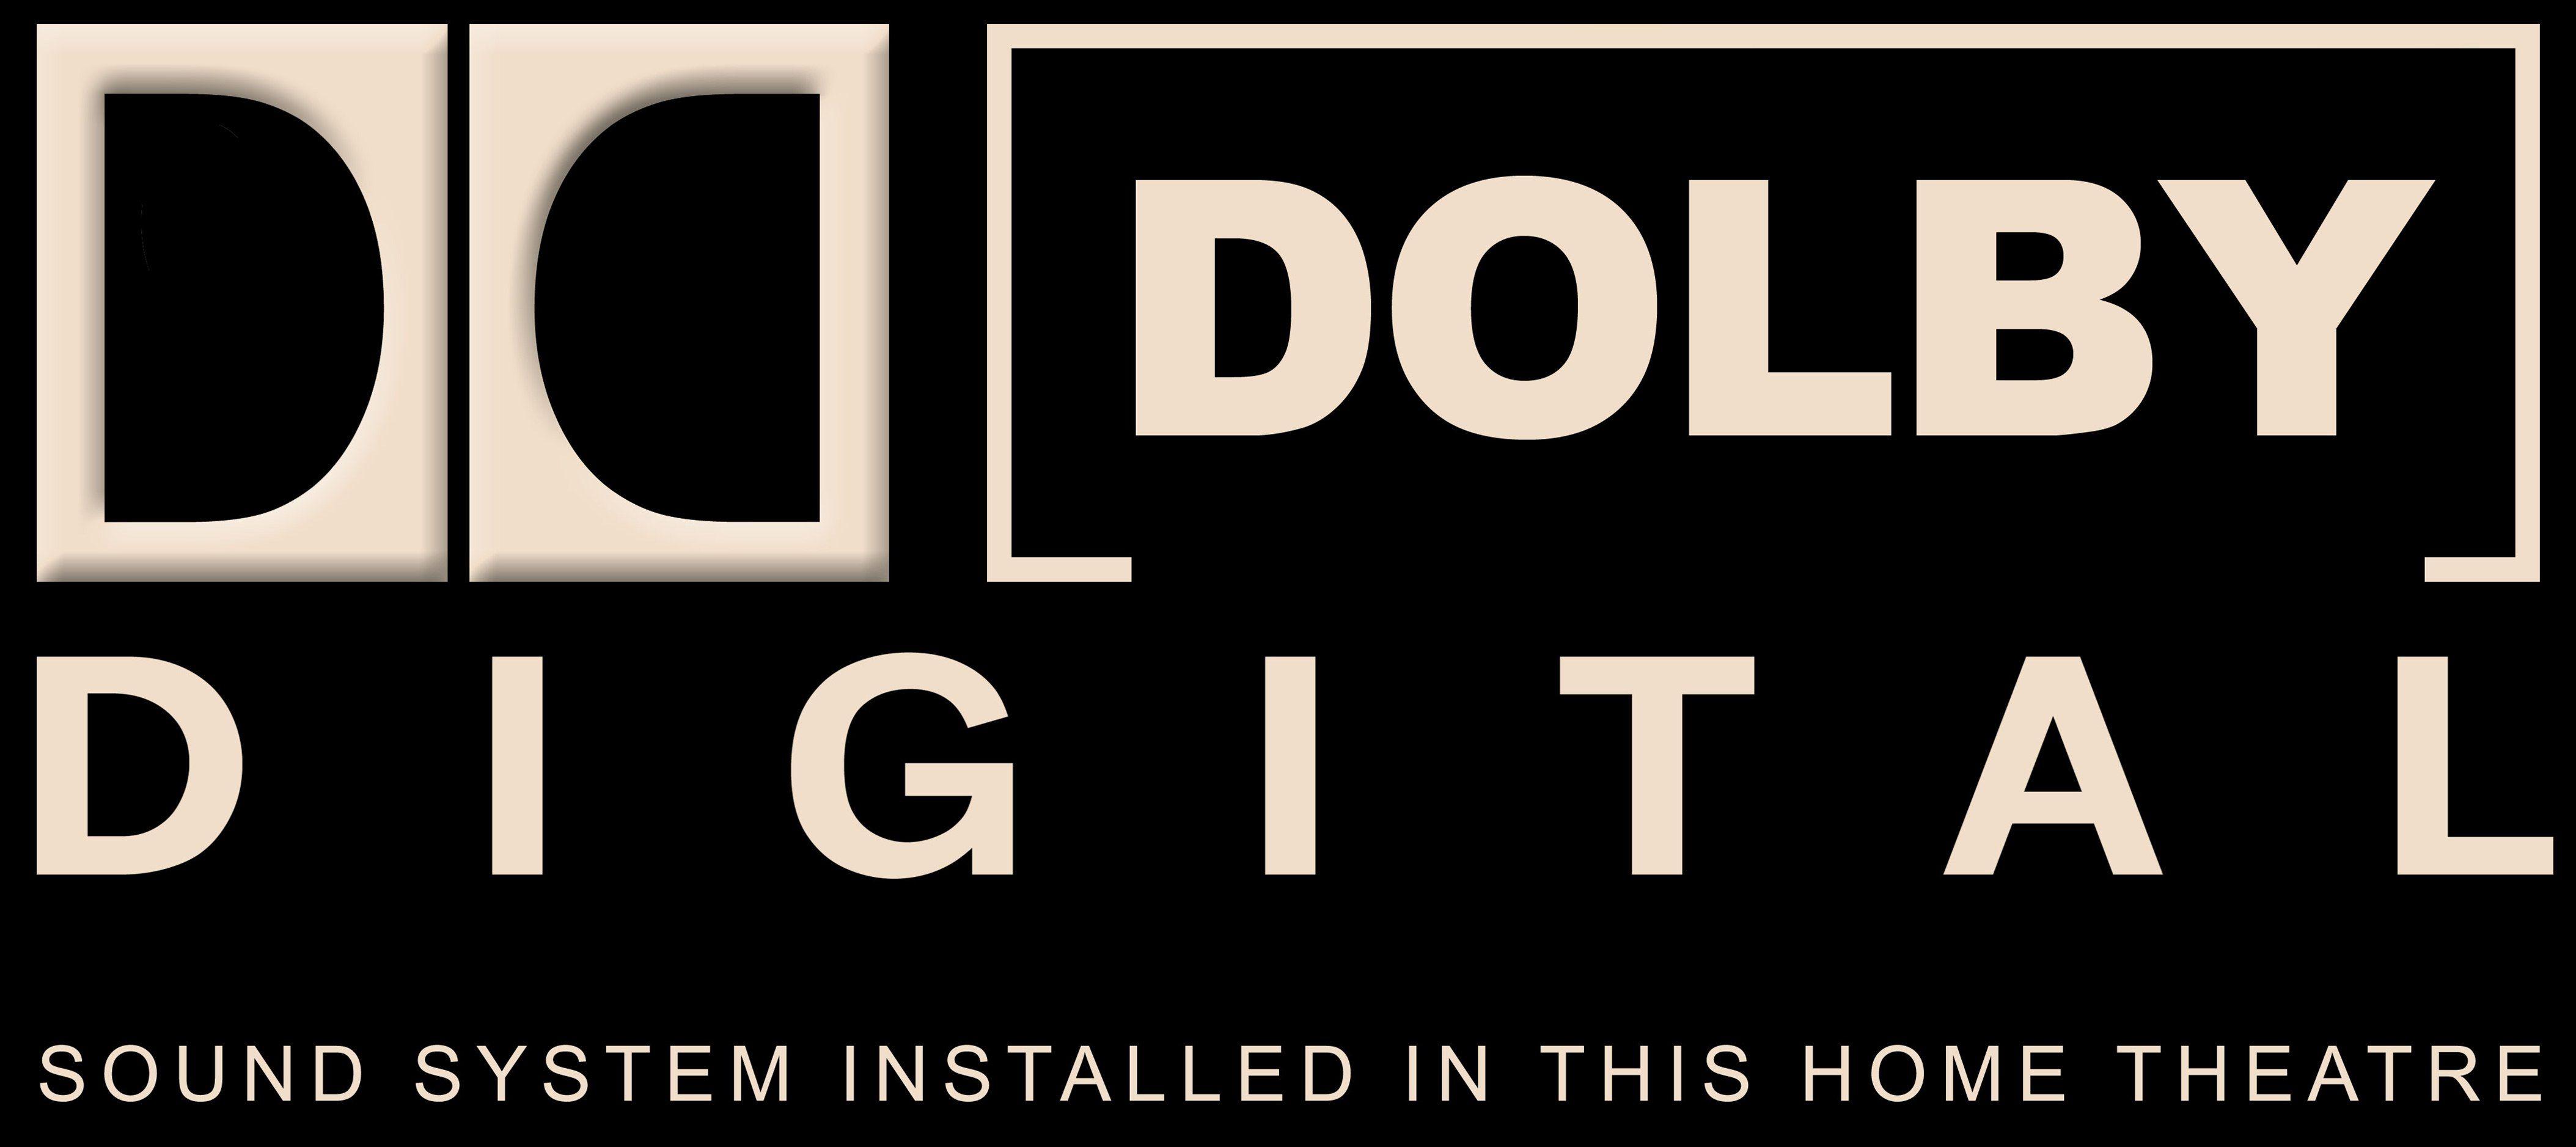 dolby digital in selected theatres logo